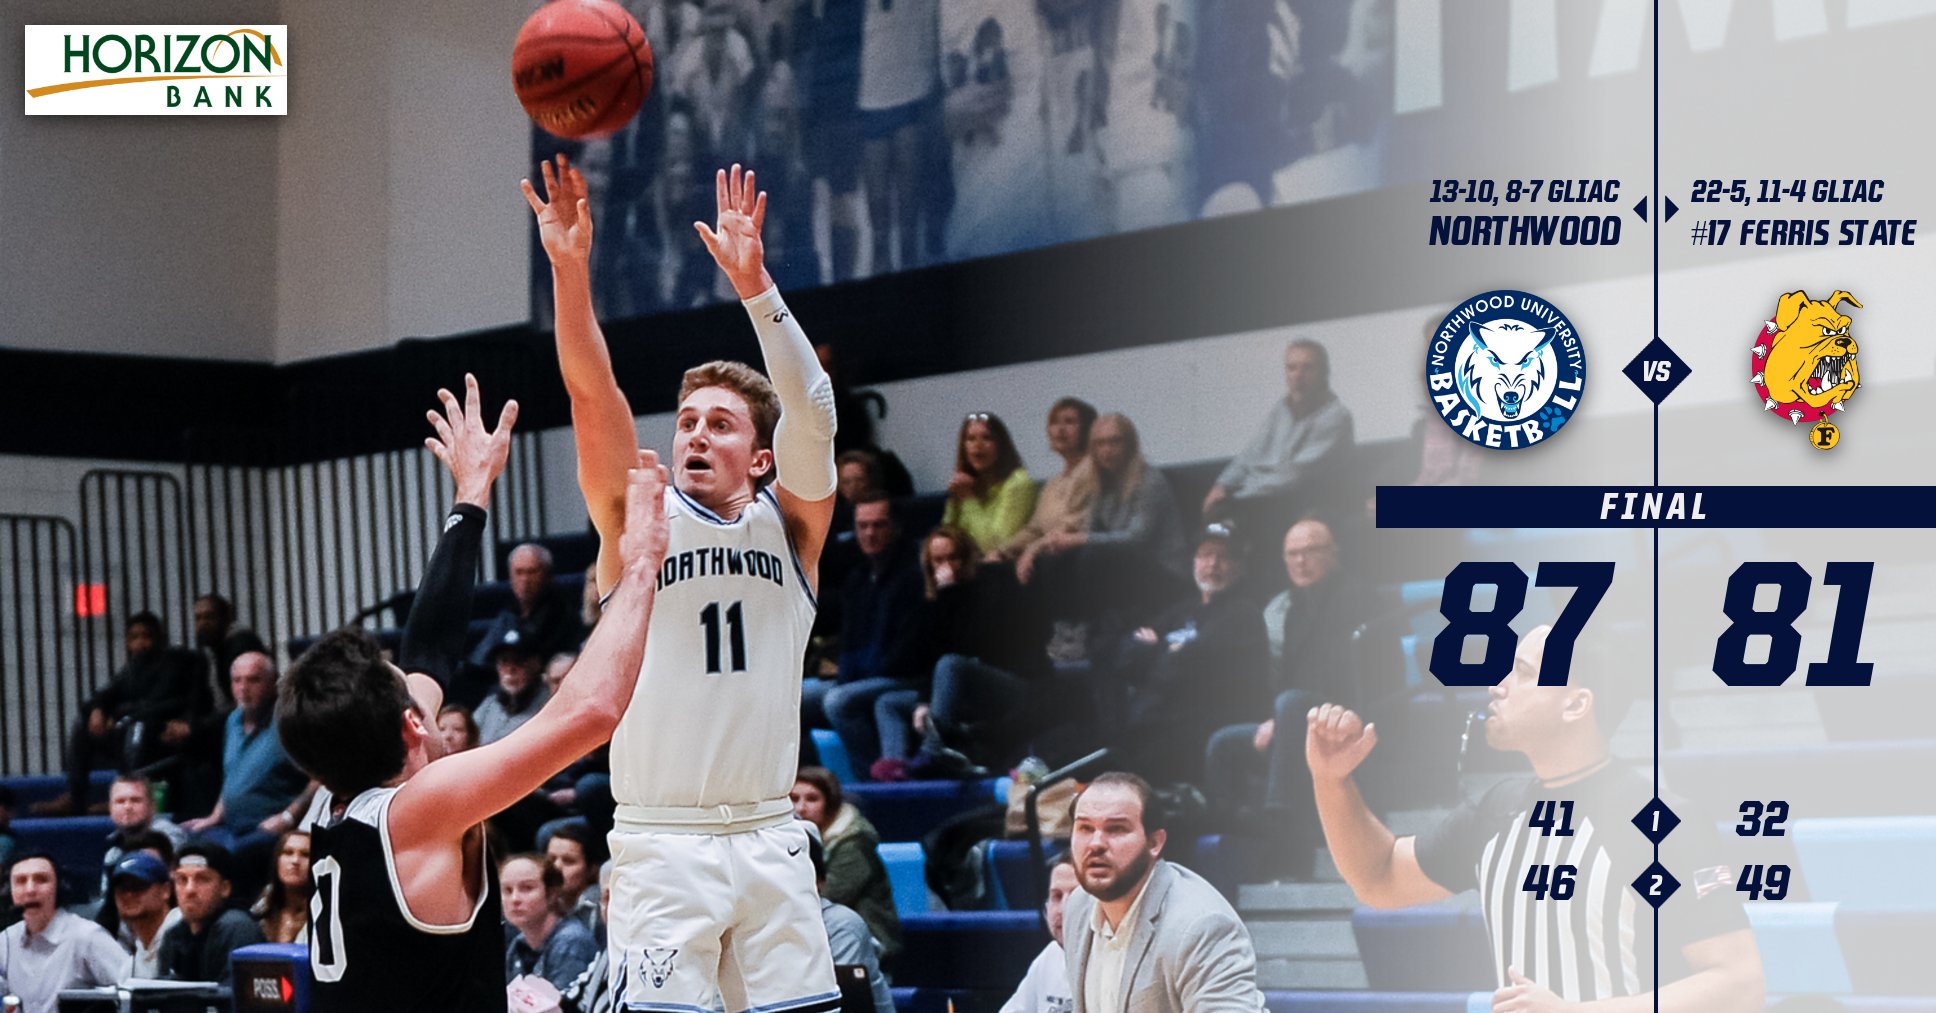 Men's Basketball Earns 87-81 Win At #17 Ferris State